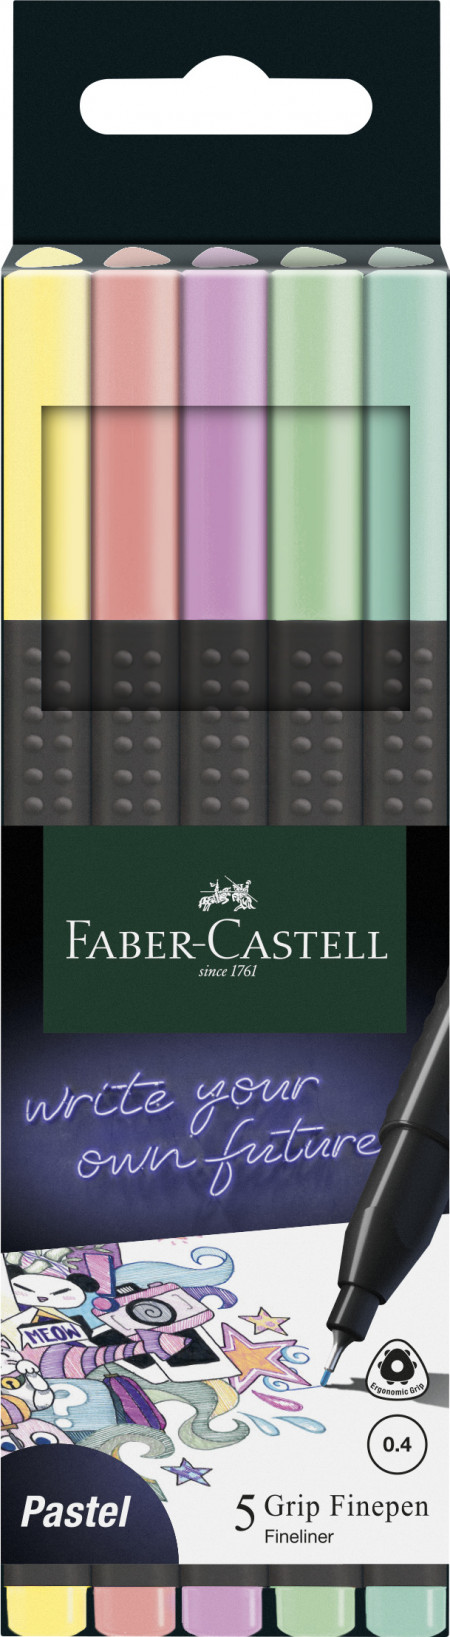 Faber-Castell Grip Finepen - Pastel (Pack of 5)